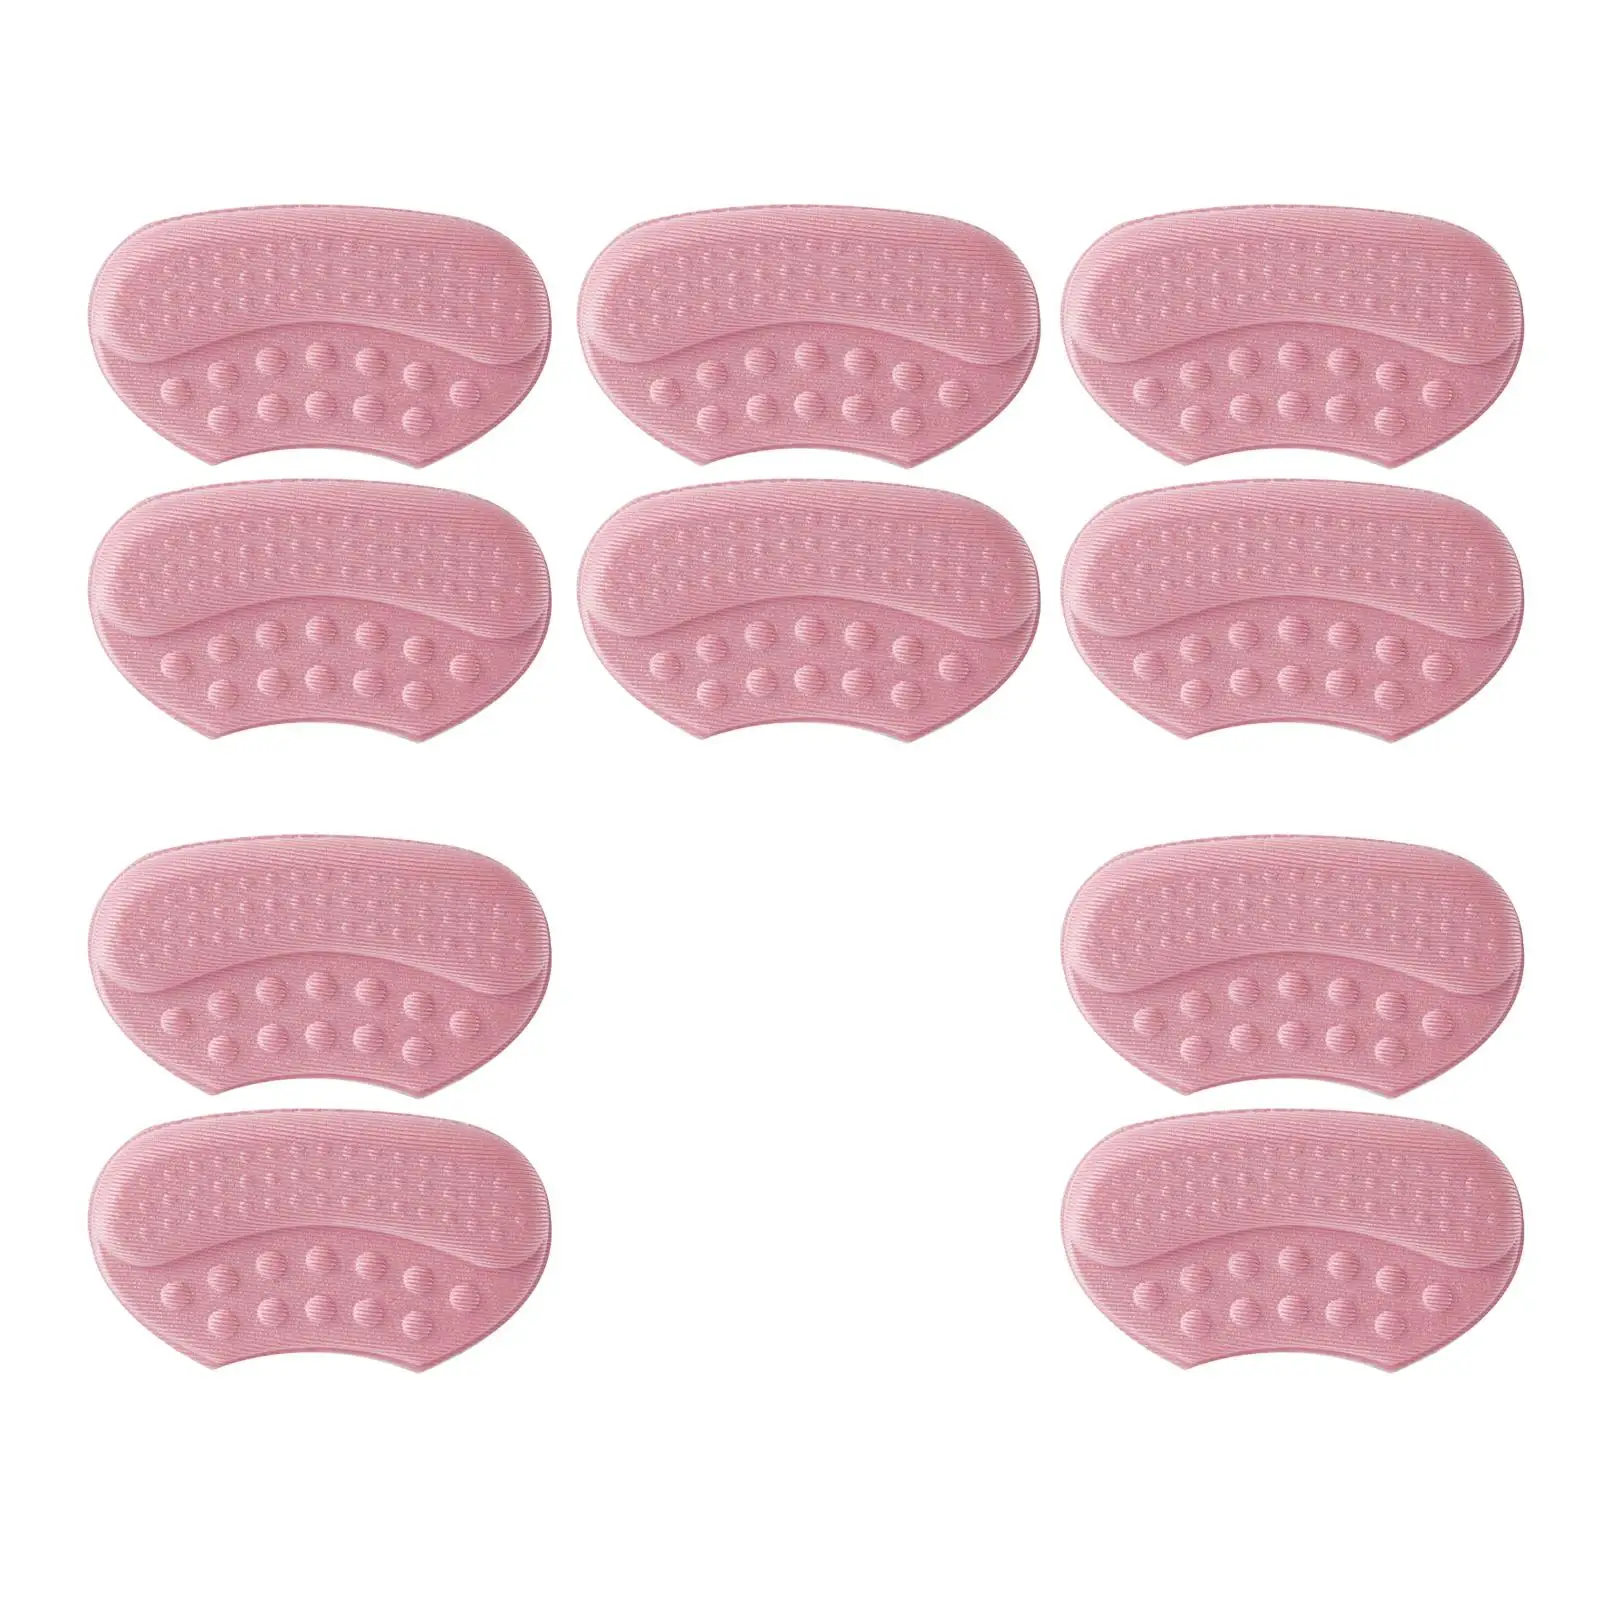 High Heels Cushion Pads High Heel Protectors Heel Liner Cushions Inserts for Sports